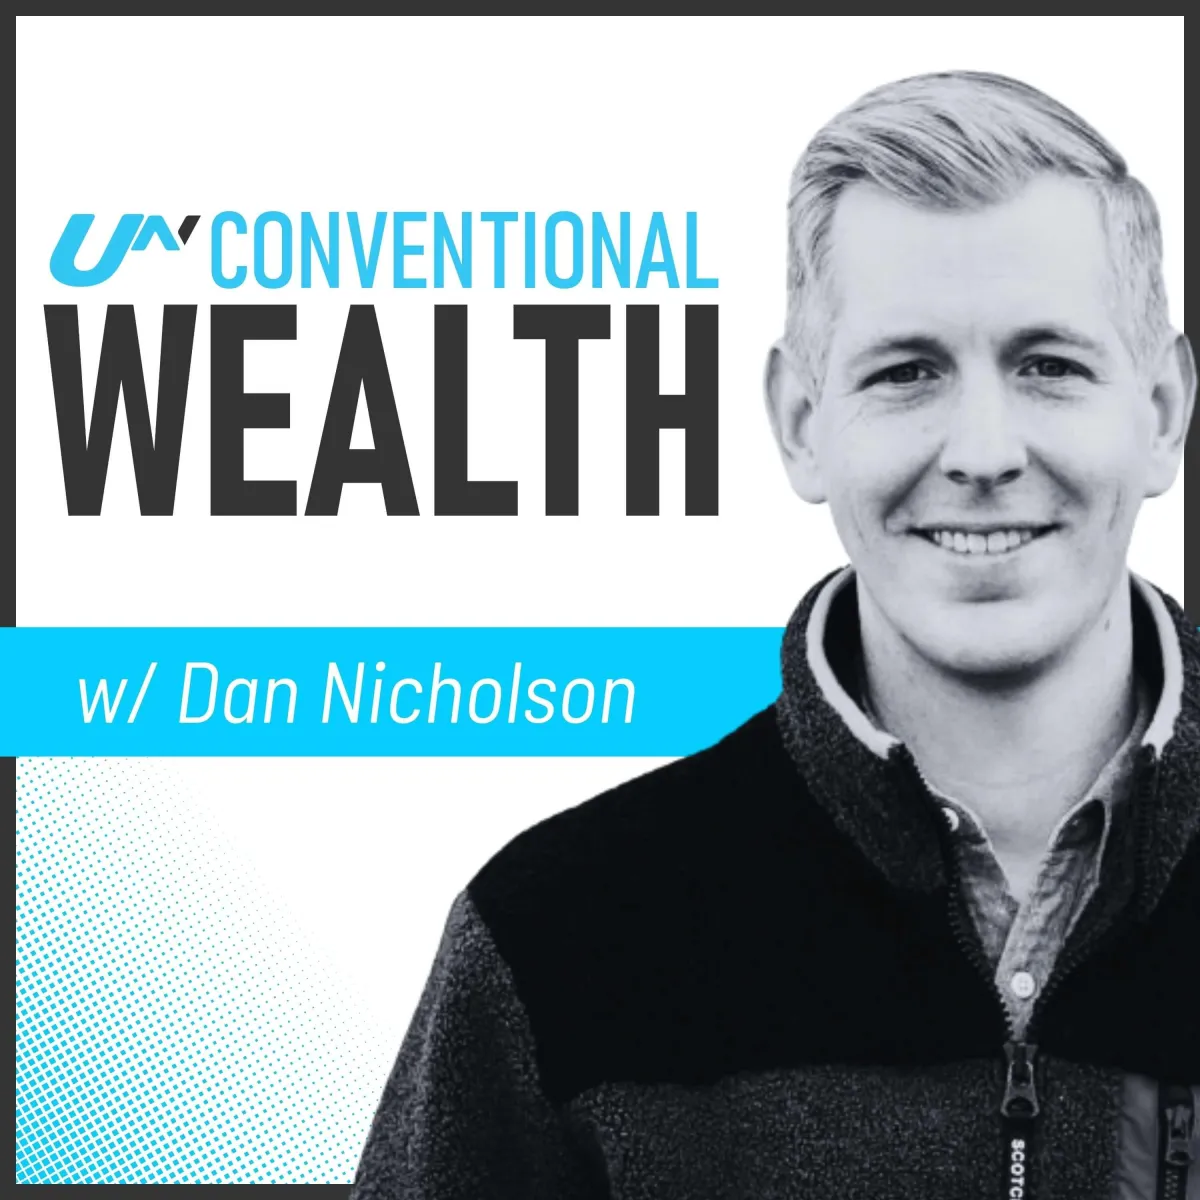 Podcast cover photo of Dan with Unconventional Wealth.